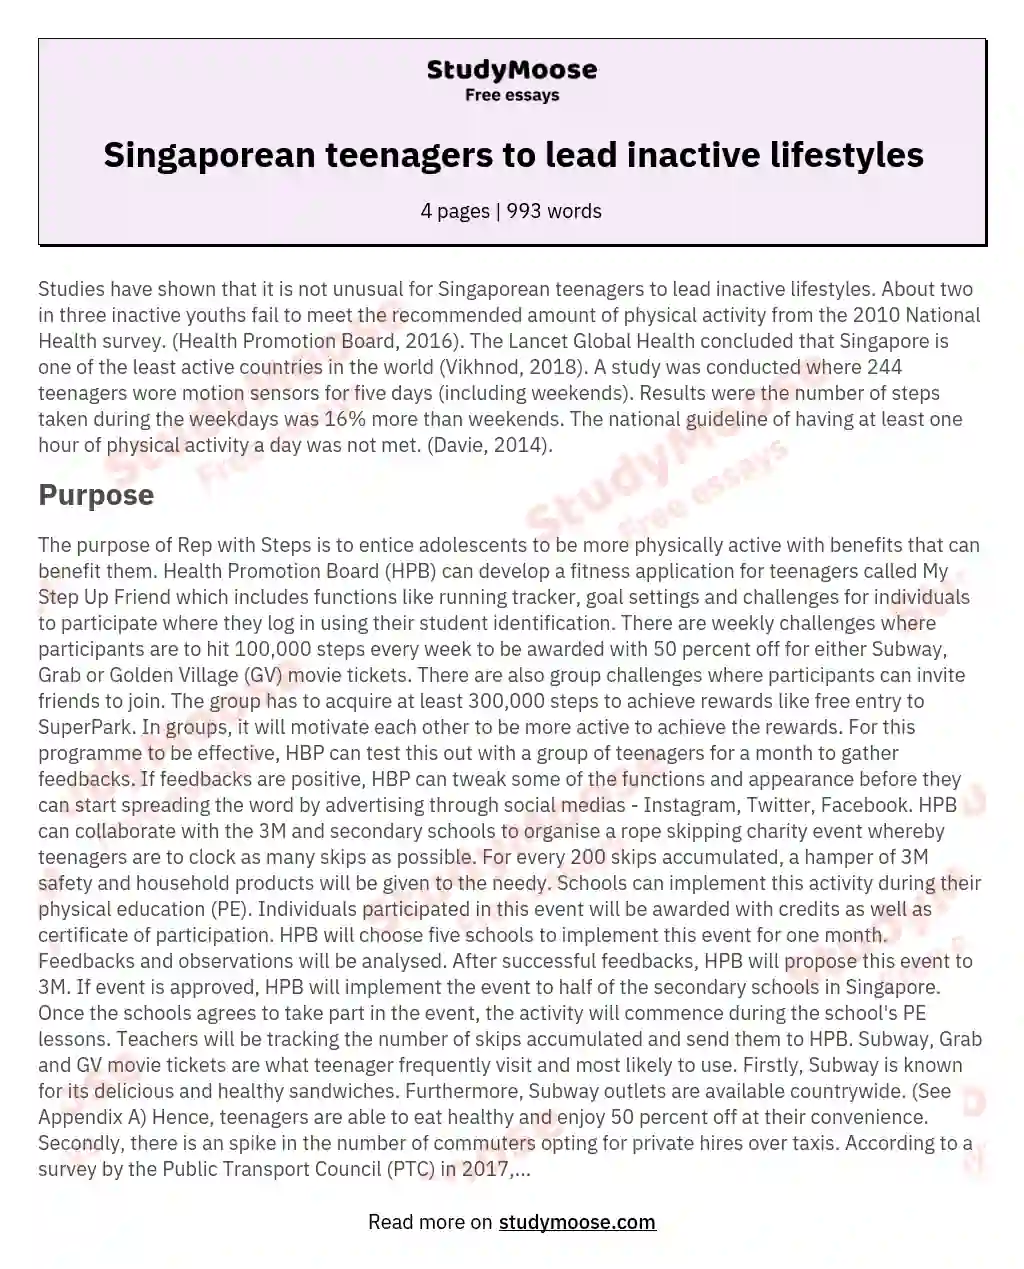 Singaporean teenagers to lead inactive lifestyles essay